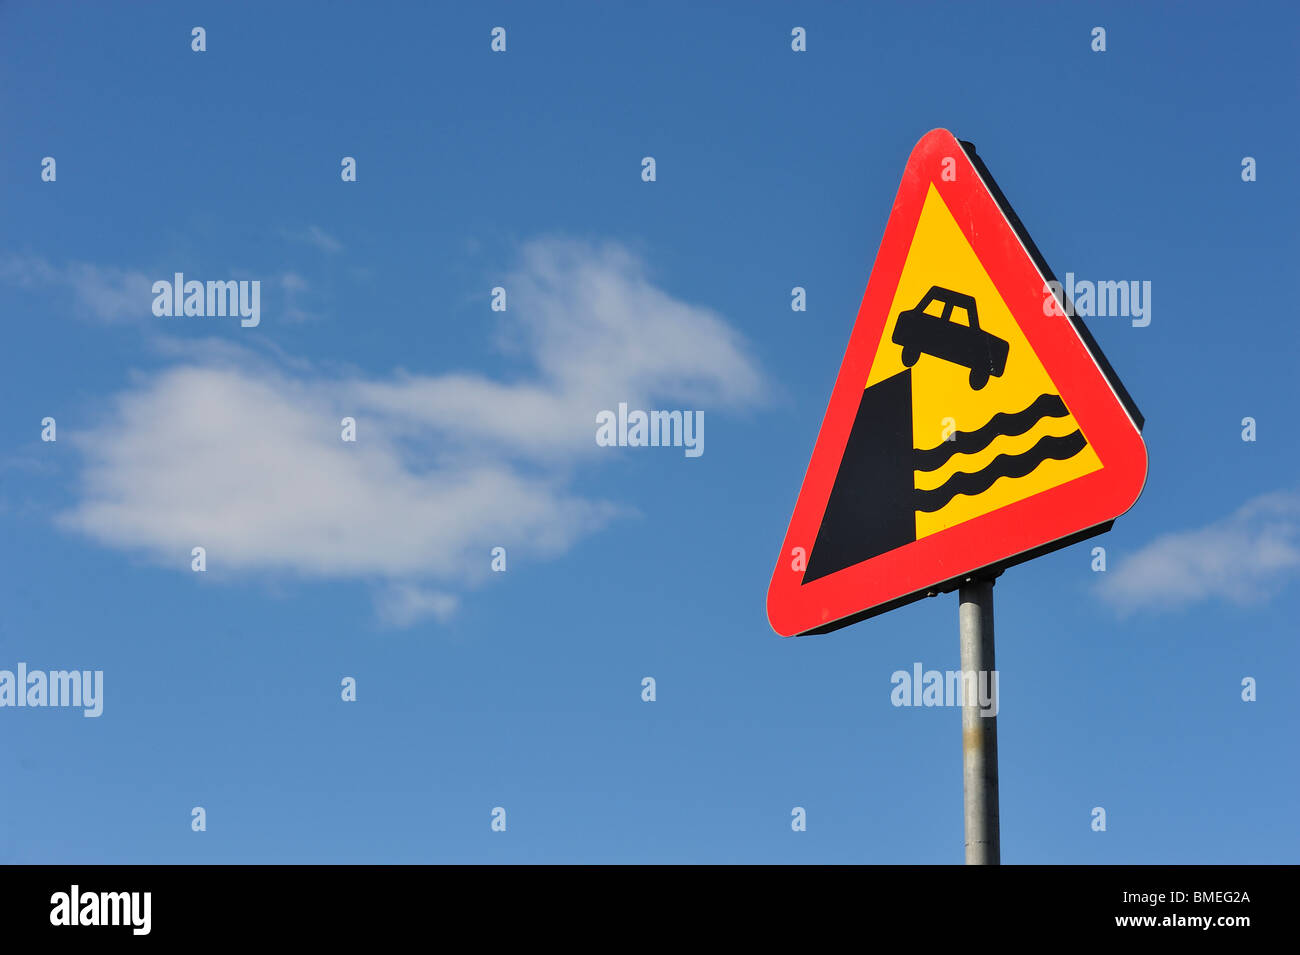 Scandinavia, Sweden, Gothenburg, View of road warning sign, low angle view Stock Photo